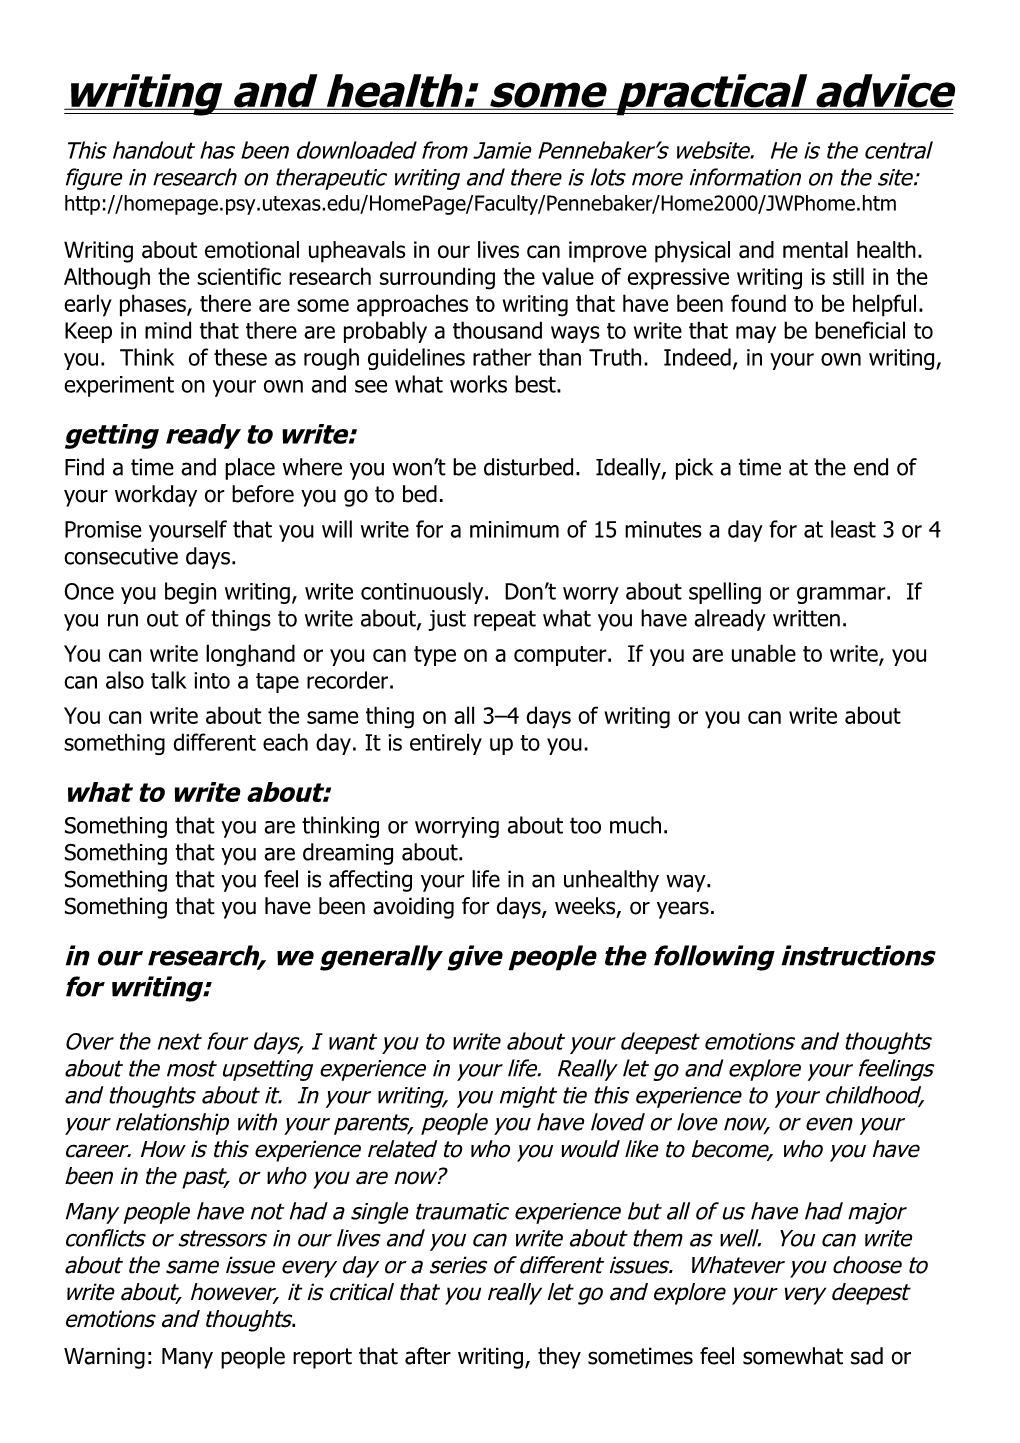 Writing and Health: Some Practical Advice